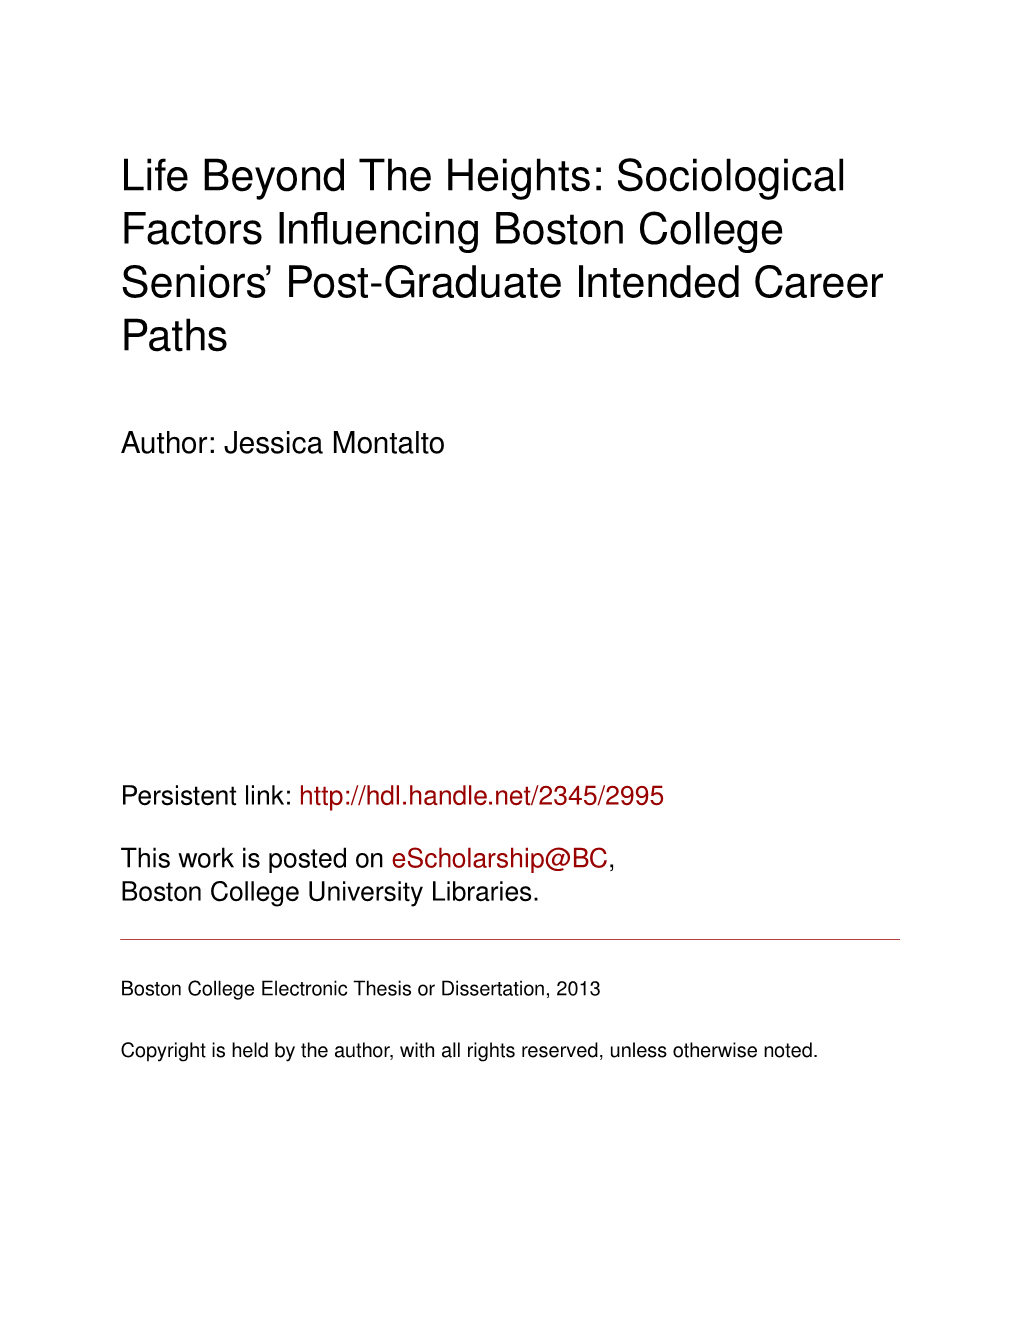 Life Beyond the Heights: Sociological Factors Influencing Boston College Seniors’ Post-Graduate Intended Career Paths”